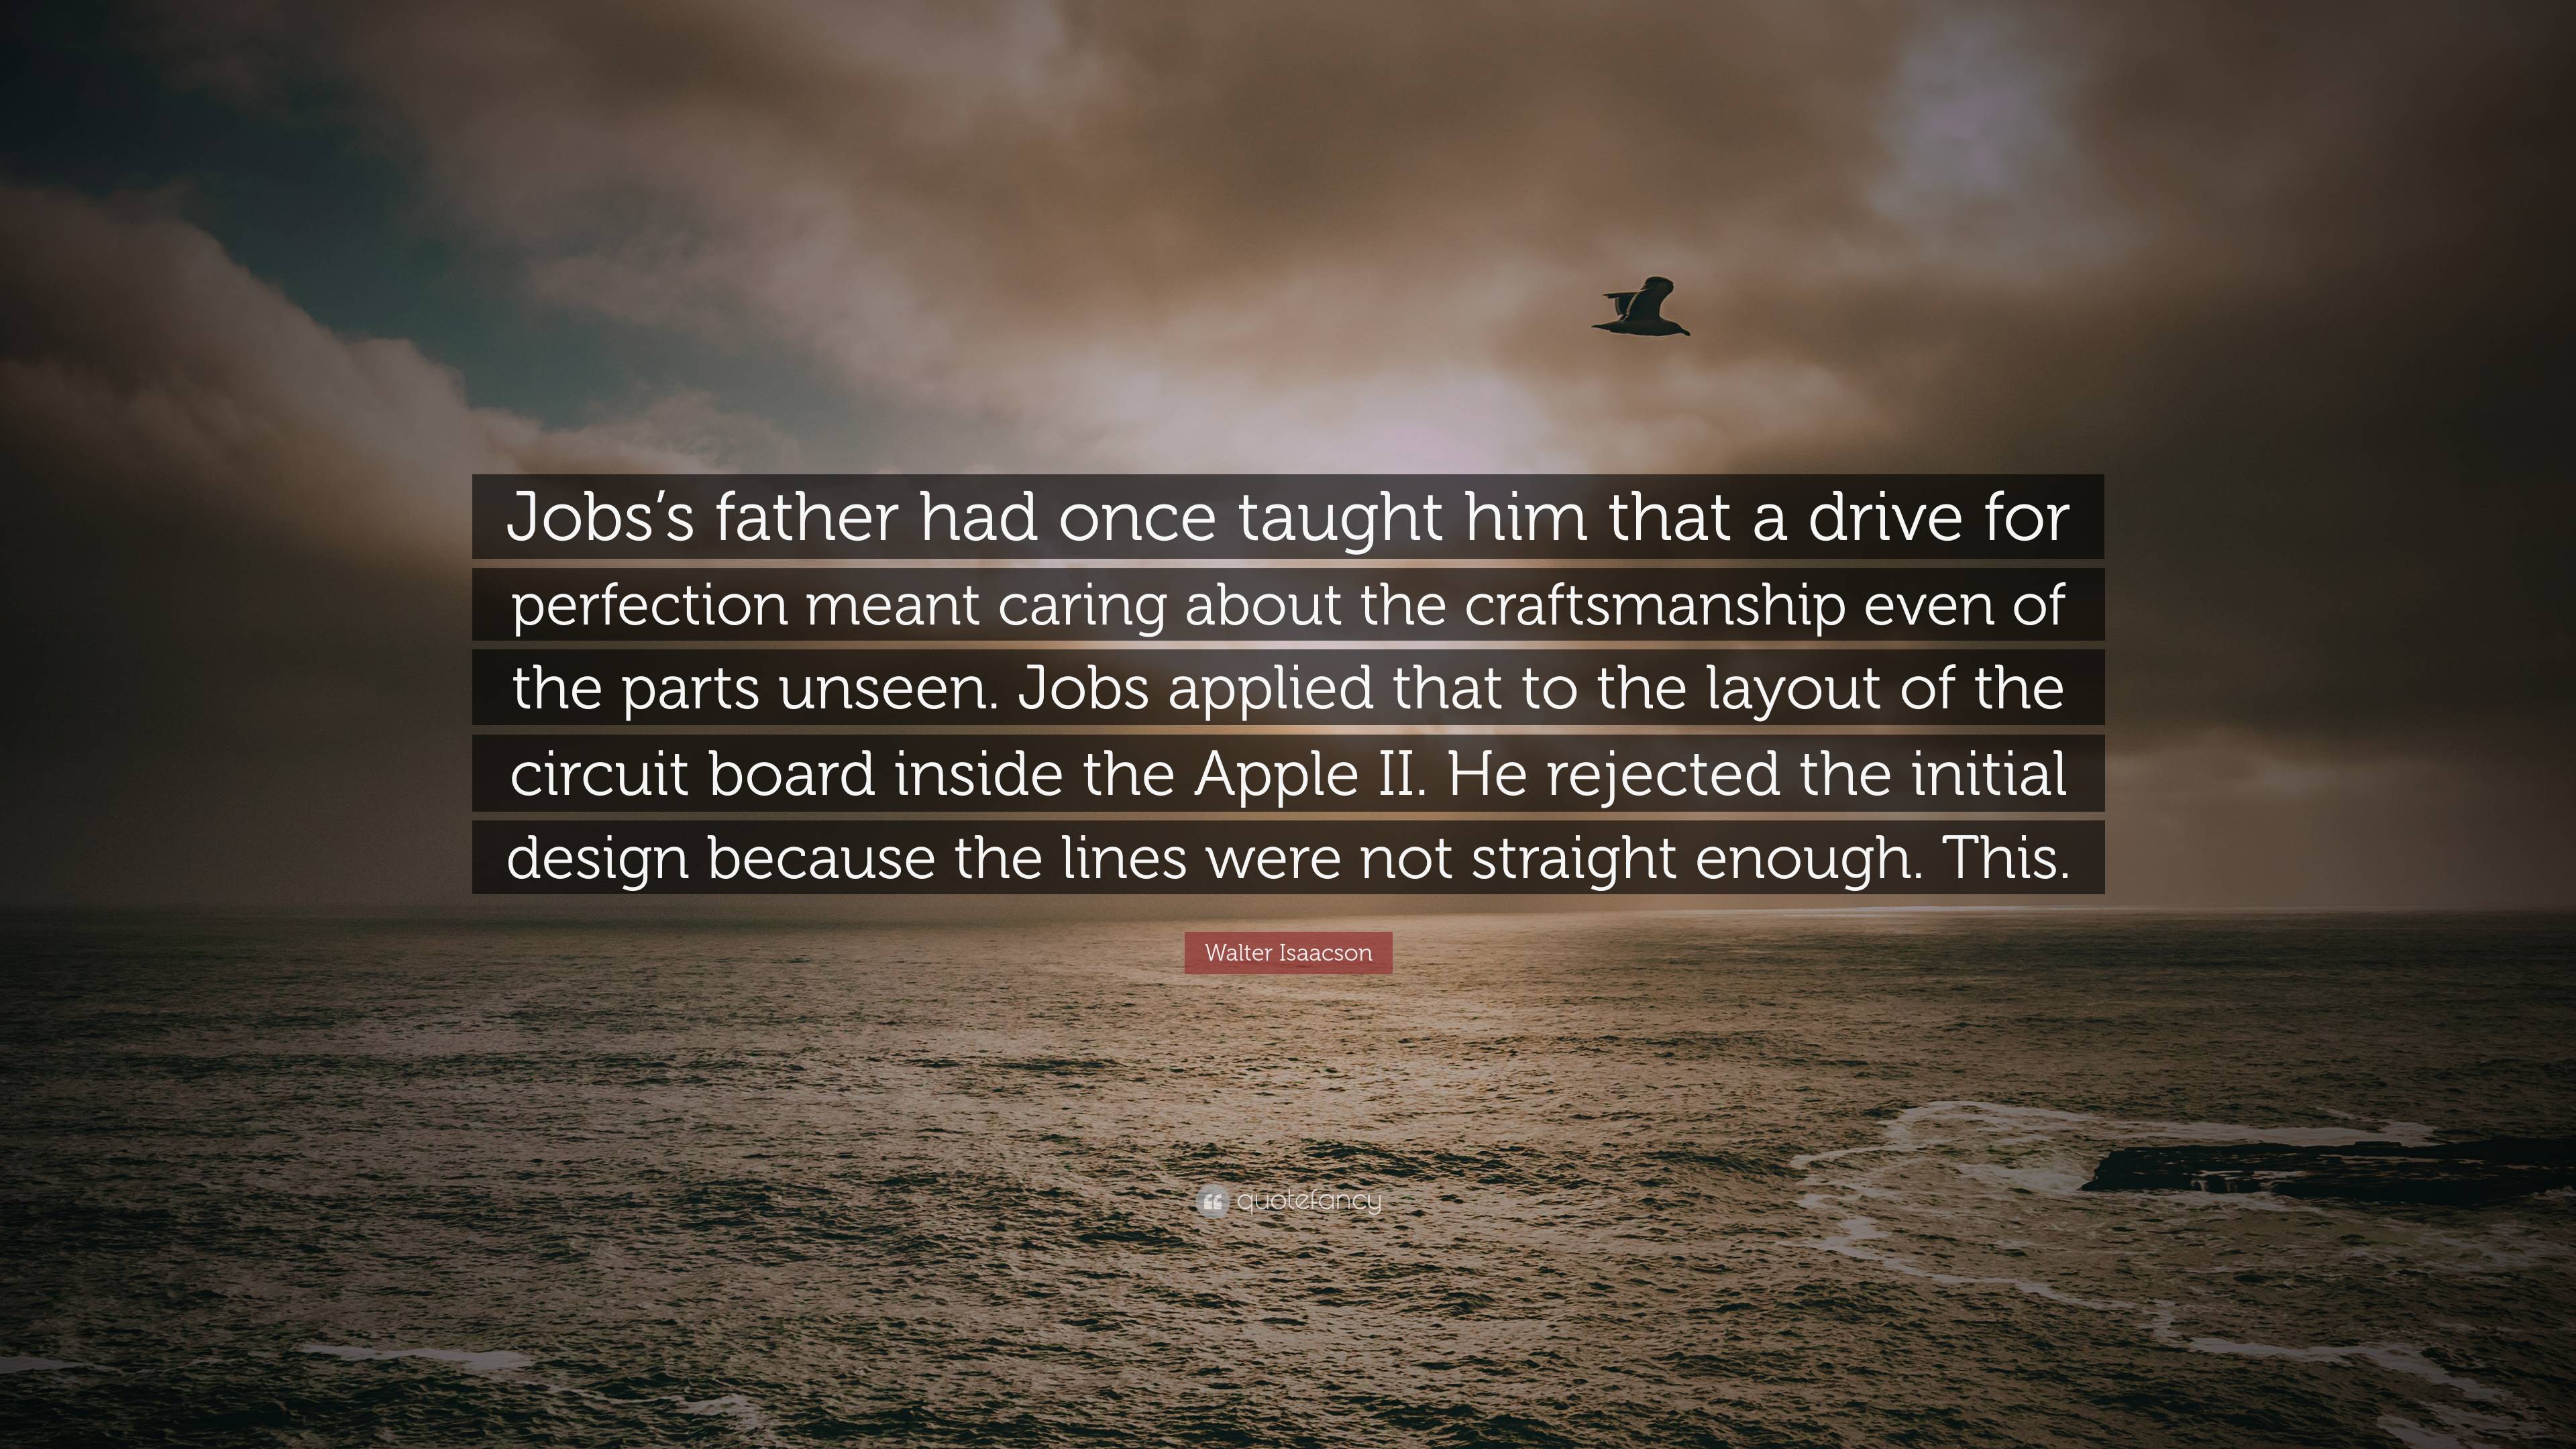 Walter Isaacson Quote: “Jobs's father had once taught him that a drive for  perfection meant caring about the craftsmanship even of the parts uns”